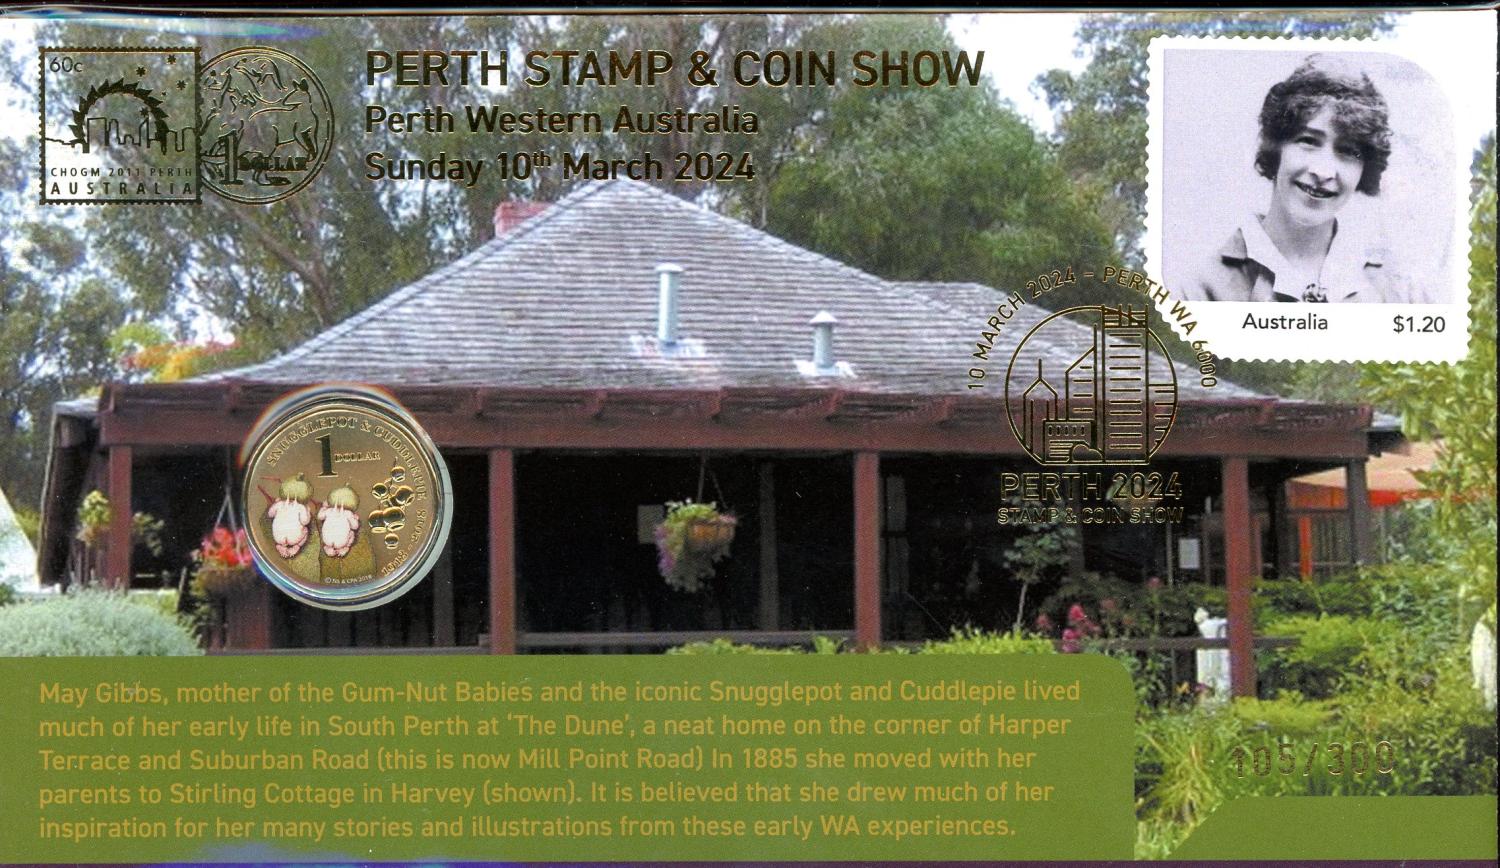 Thumbnail for 2024 Perth Stamp and Coin Show May Gibbs Snugglepot and Cuddlepie PNC 105 - 300